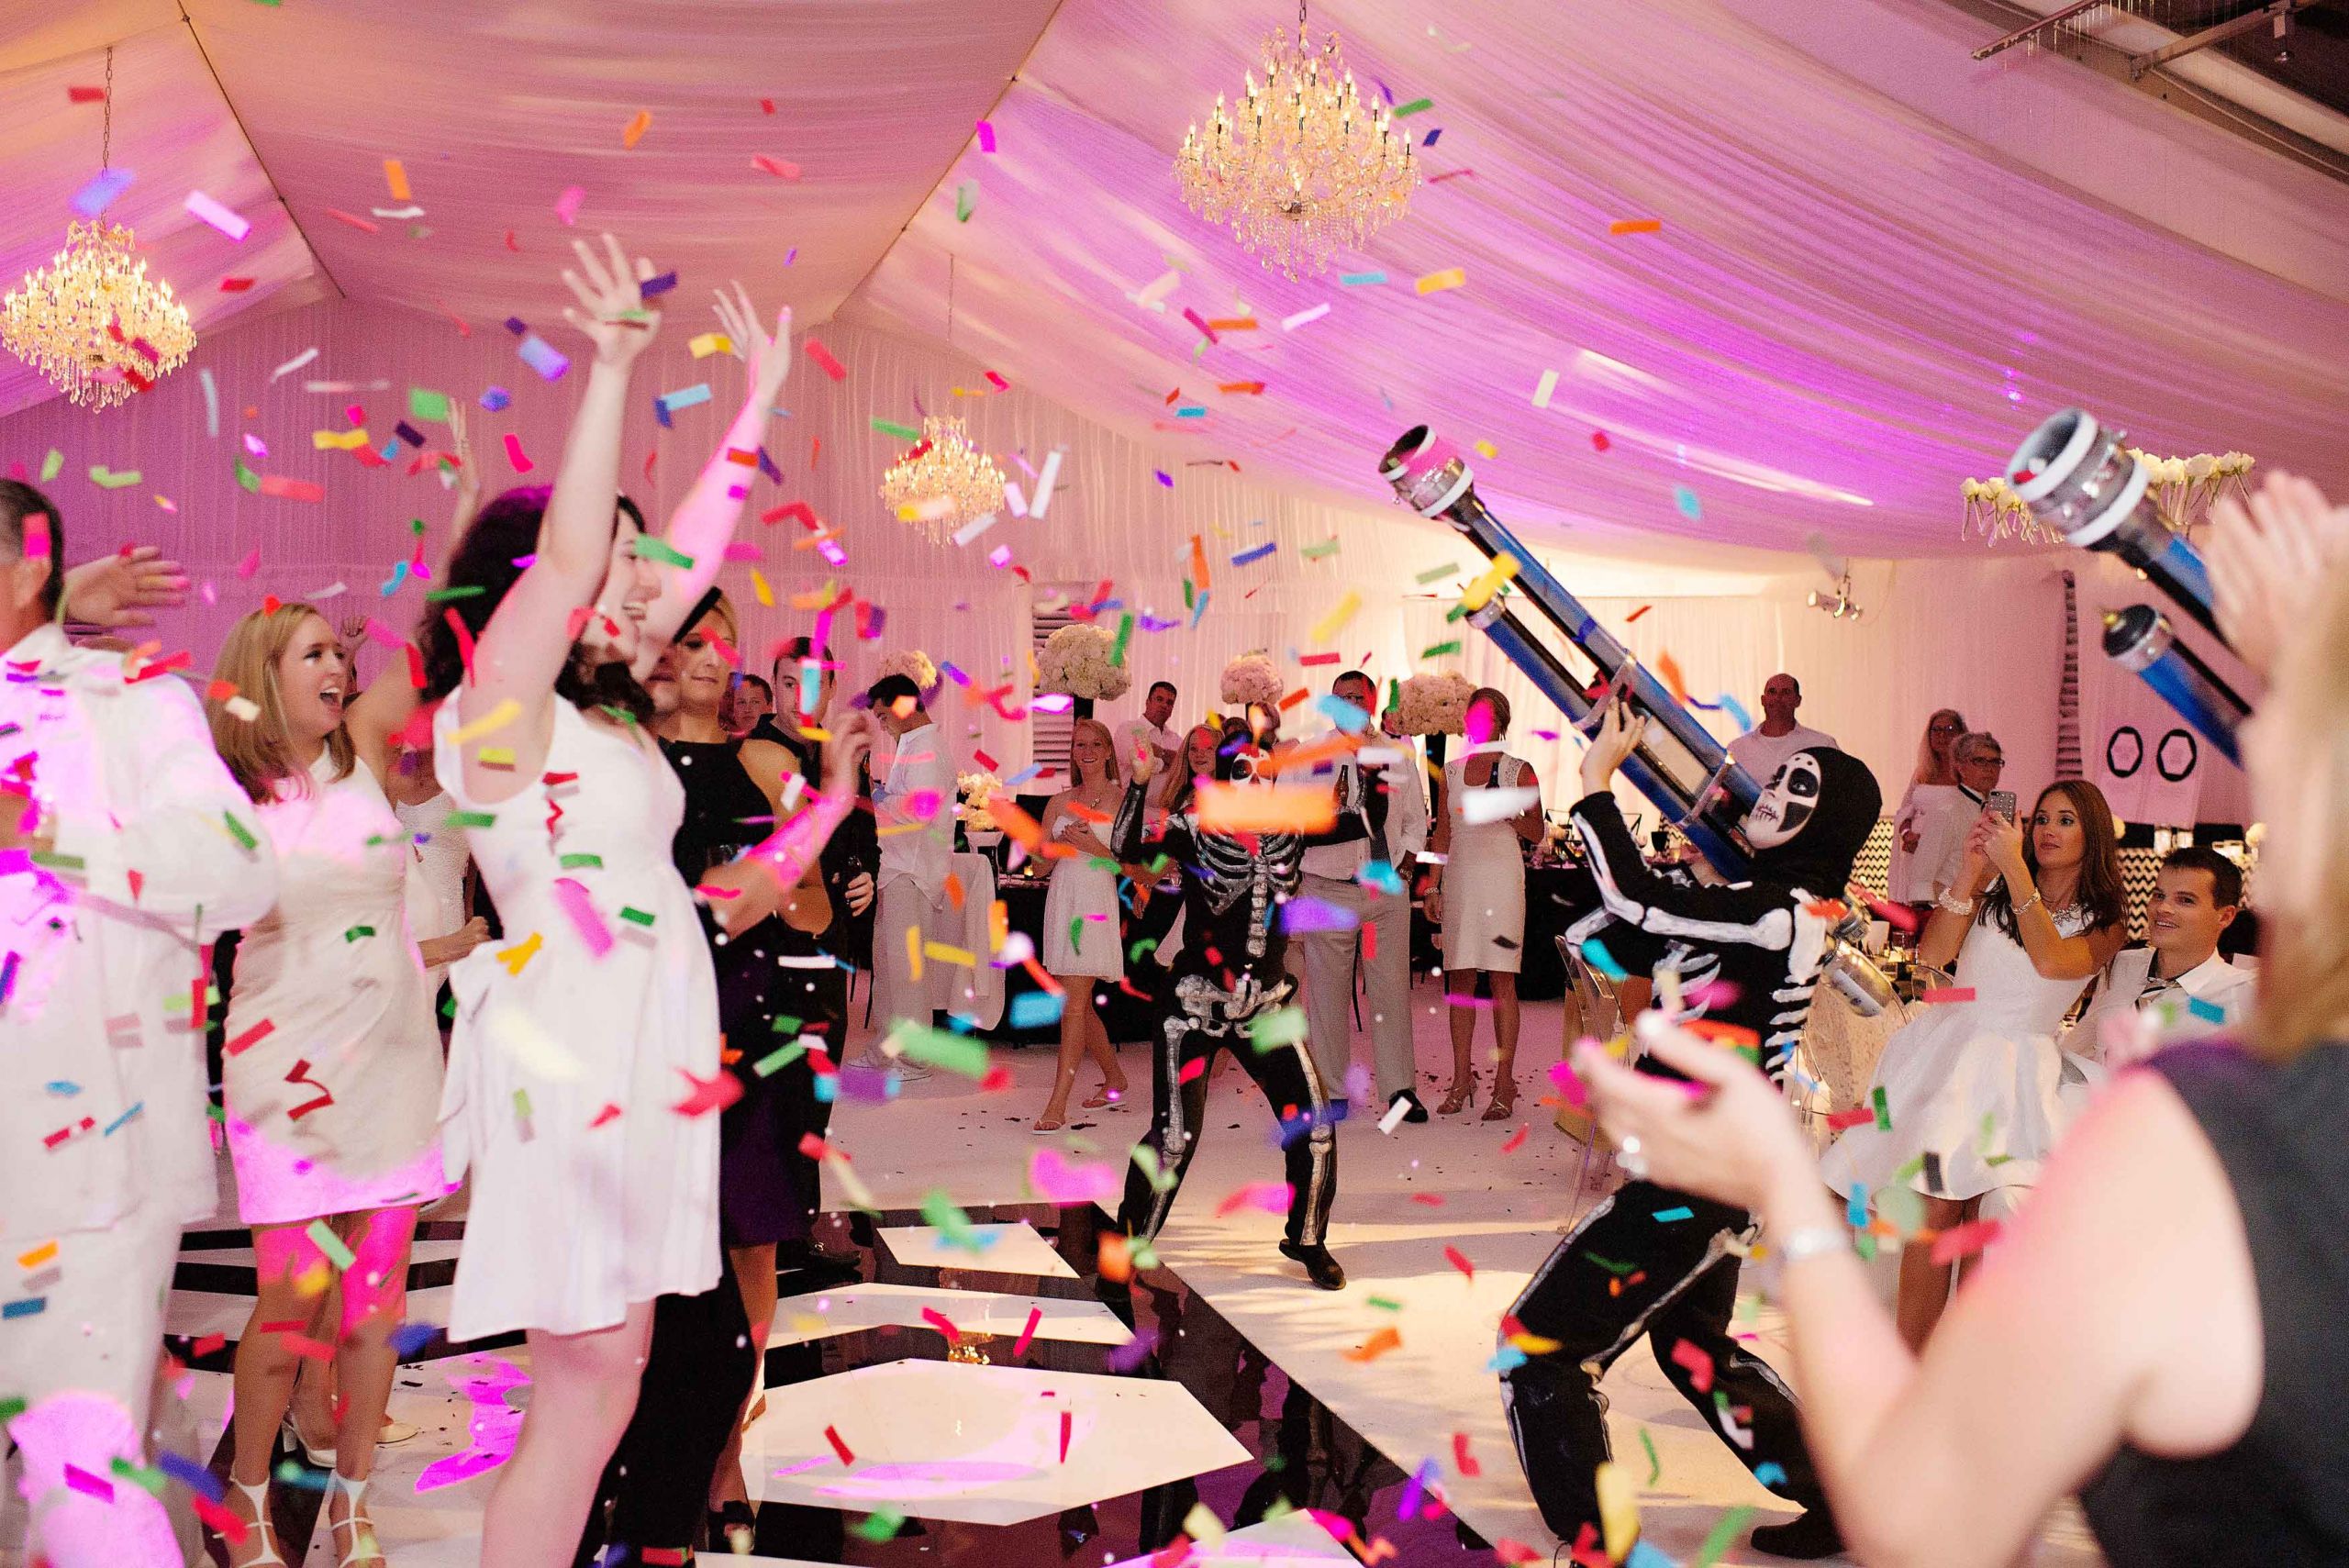 Engagement Party Entertainment Ideas
 Wedding Reception Ideas How to Keep Guests Energized